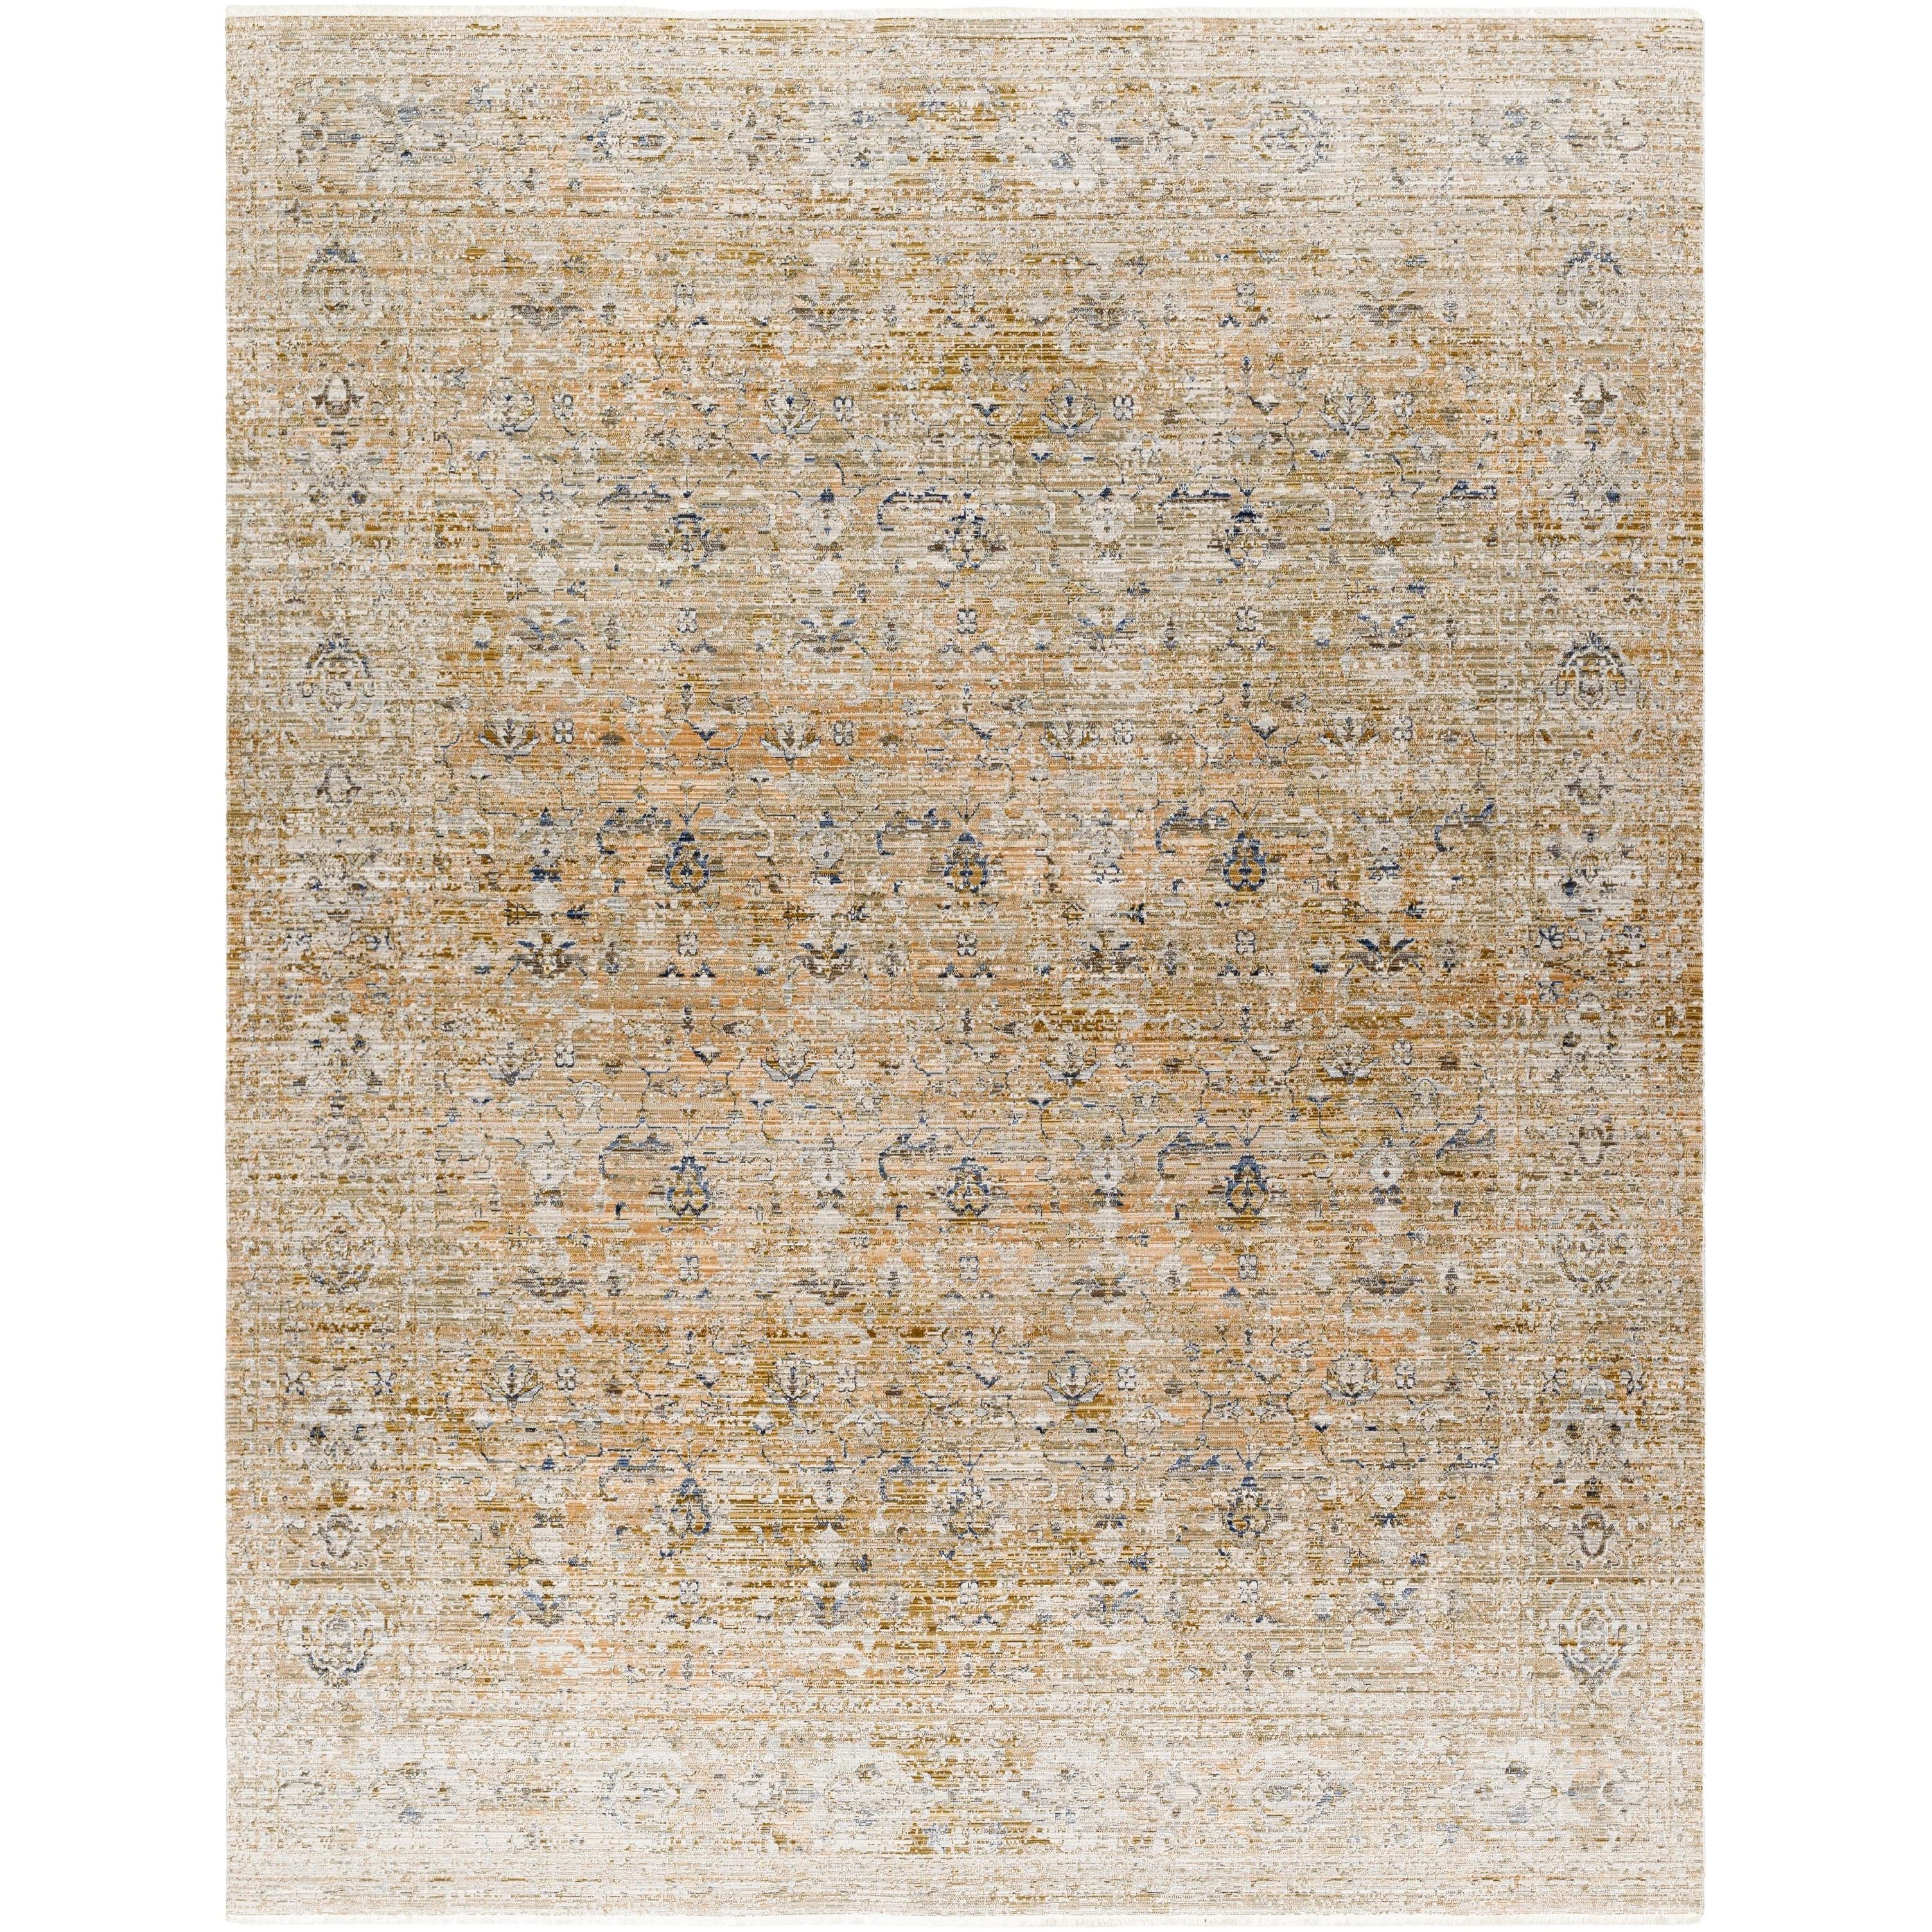 The Margaret area rug is a truly special collection from our Becki Owens x Surya line. A beautiful addition to any room, the Margaret area rug features a unique combination of warm neutrals and navy details. Amethyst Home provides interior design, new home construction design consulting, vintage area rugs, and lighting in the San Diego metro area.